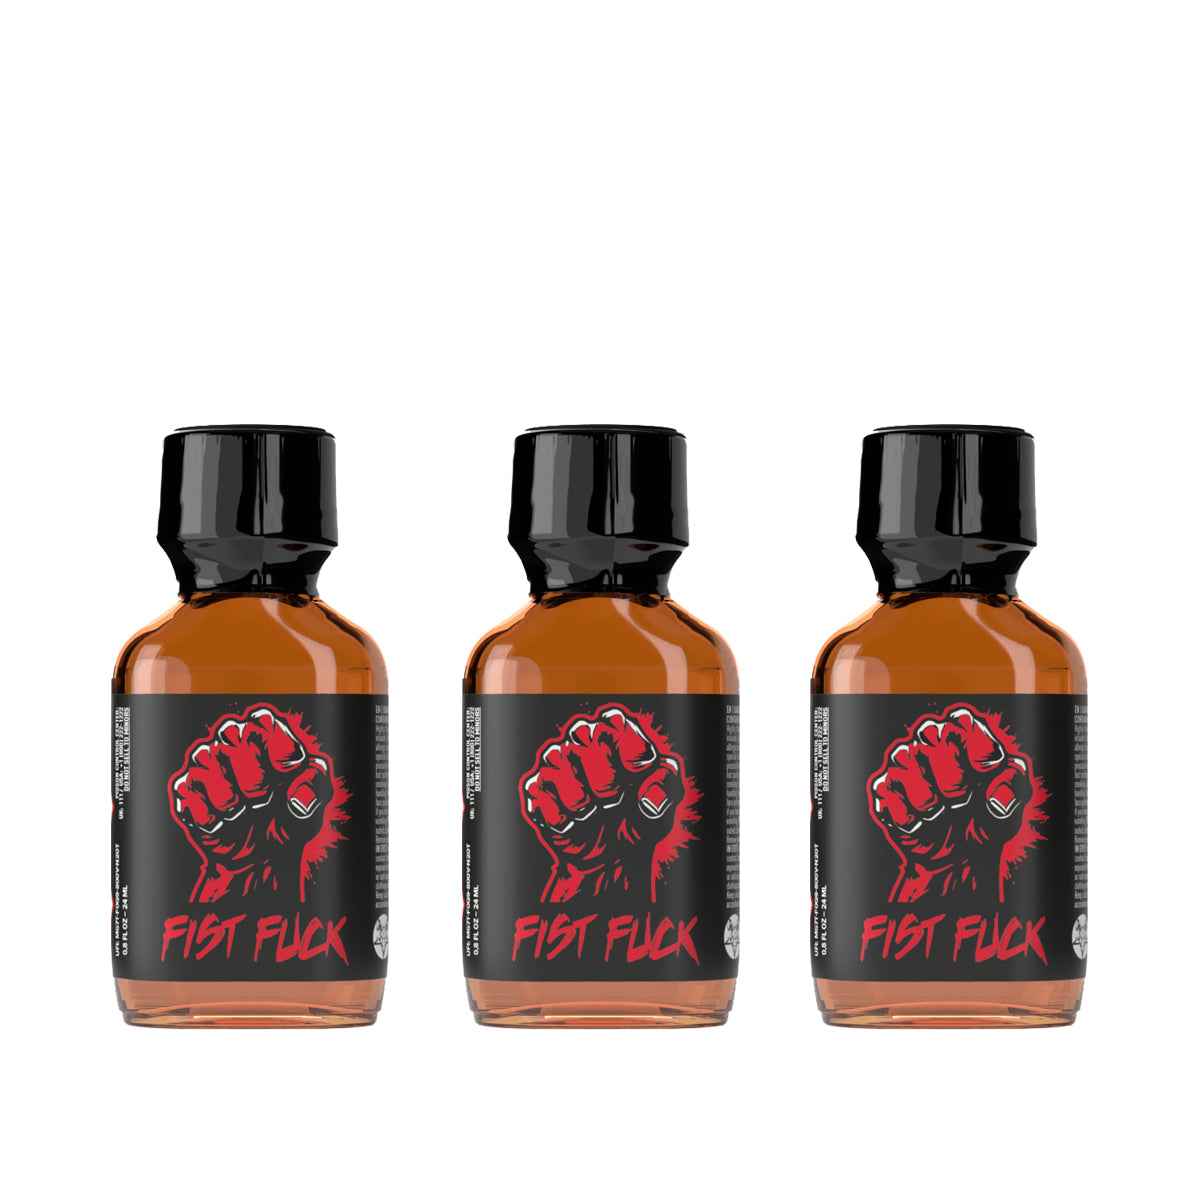 A triple pack of Fist Fuck Amyl Poppers by Twisted Beast.